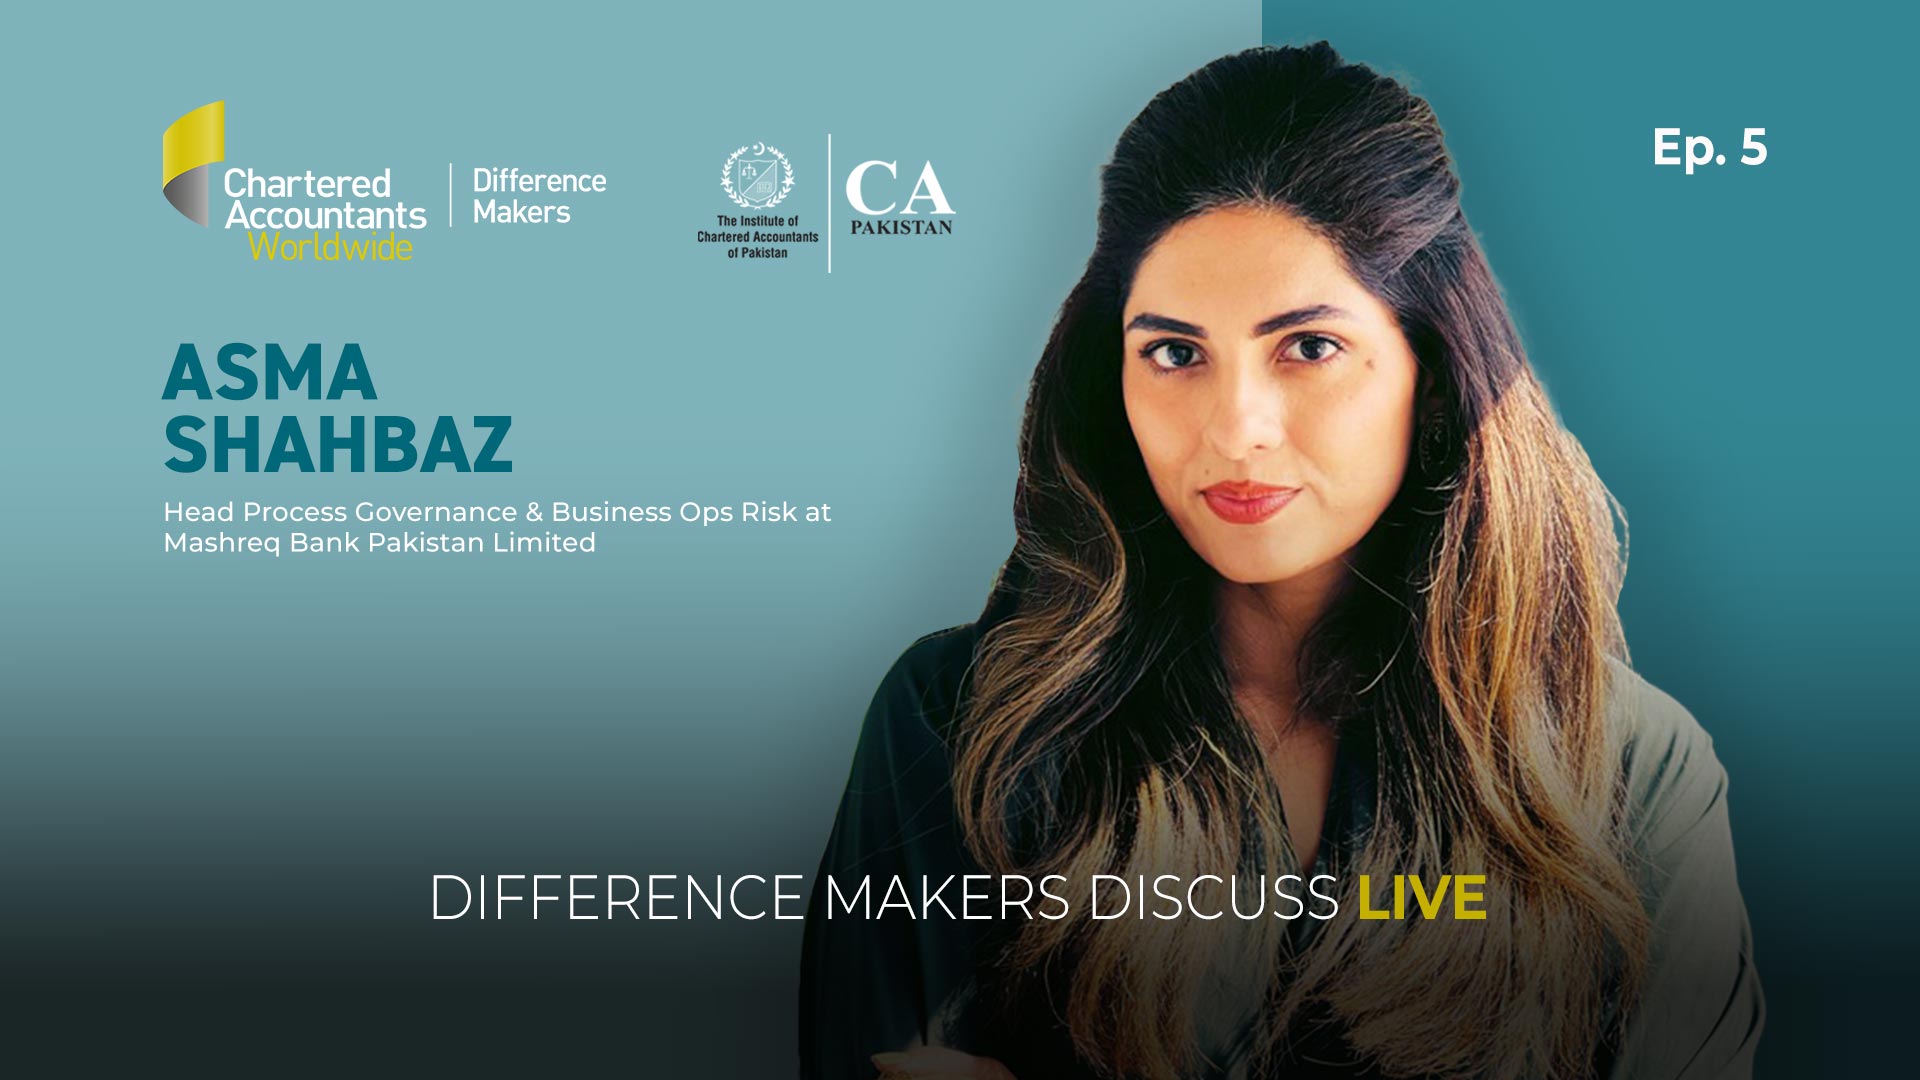 Episode 5: Breaking Barriers in Finance - Asma Shabaz’s Journey to Success